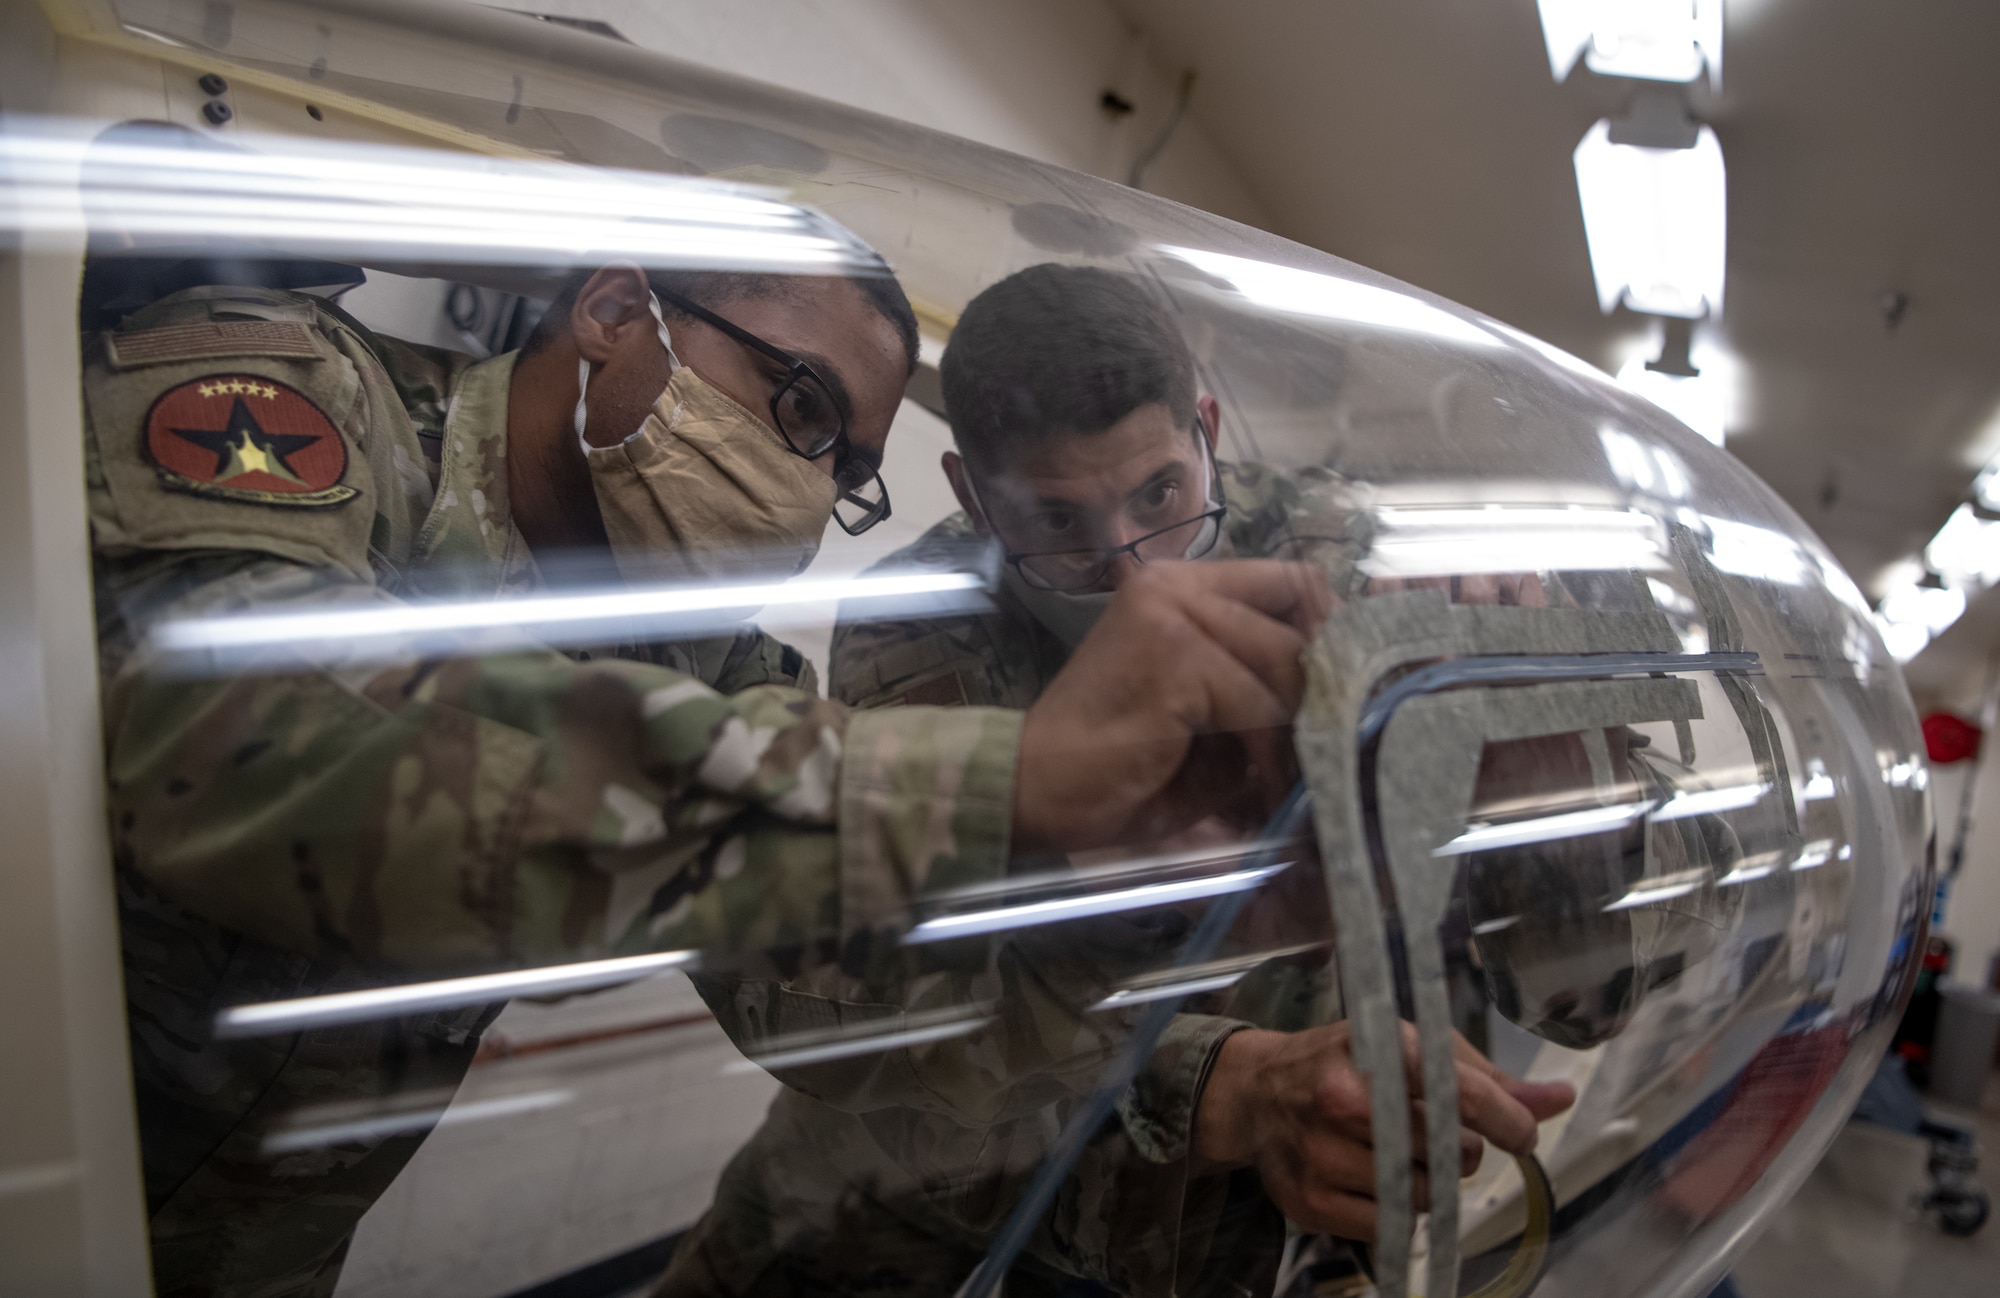 Senior Airman Matthew Romano, 56th Component Maintenance Squadron aircrew egress systems journeyman (left), trains Airman 1st Class Delwyn Travillion, 56th CMS aircrew egress systems apprentice, on the installation of a flexible linear shaped charge (FLSC) July 13, 2020, at Luke Air Force Base, Ariz. The FLSC install is a 120-hour process, and the charge must be replaced every three years. Training of this task is essential to the overall integrity of the F-35A Lightning II canopy. (U.S. Air Force photo by Airman 1st Class Dominic Tyler)